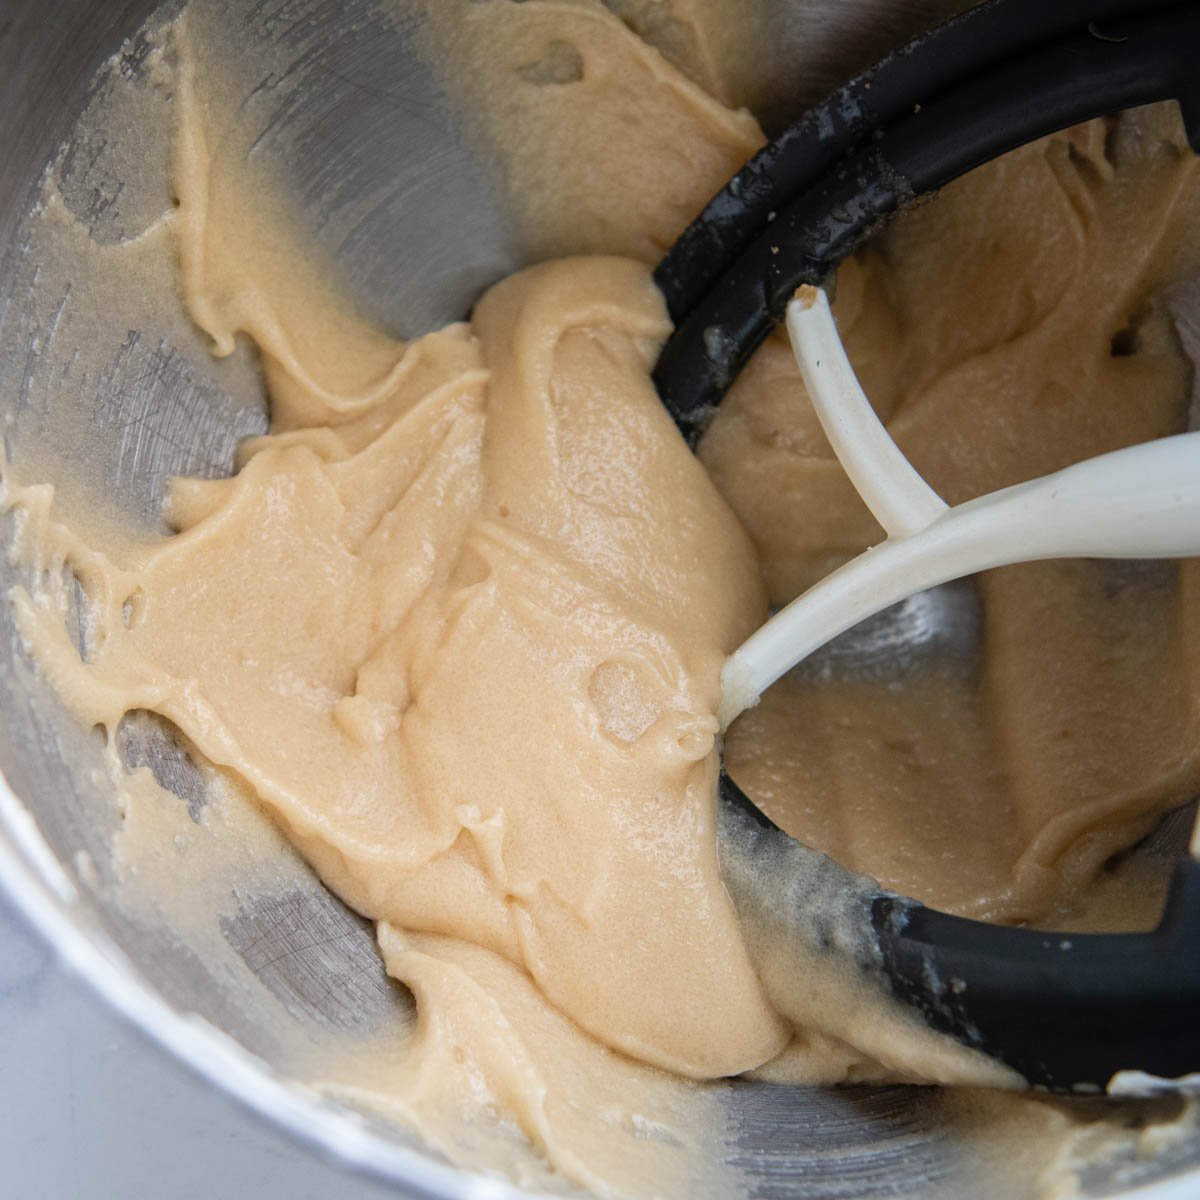 the banana cake batter after the fats and sugars are combined.